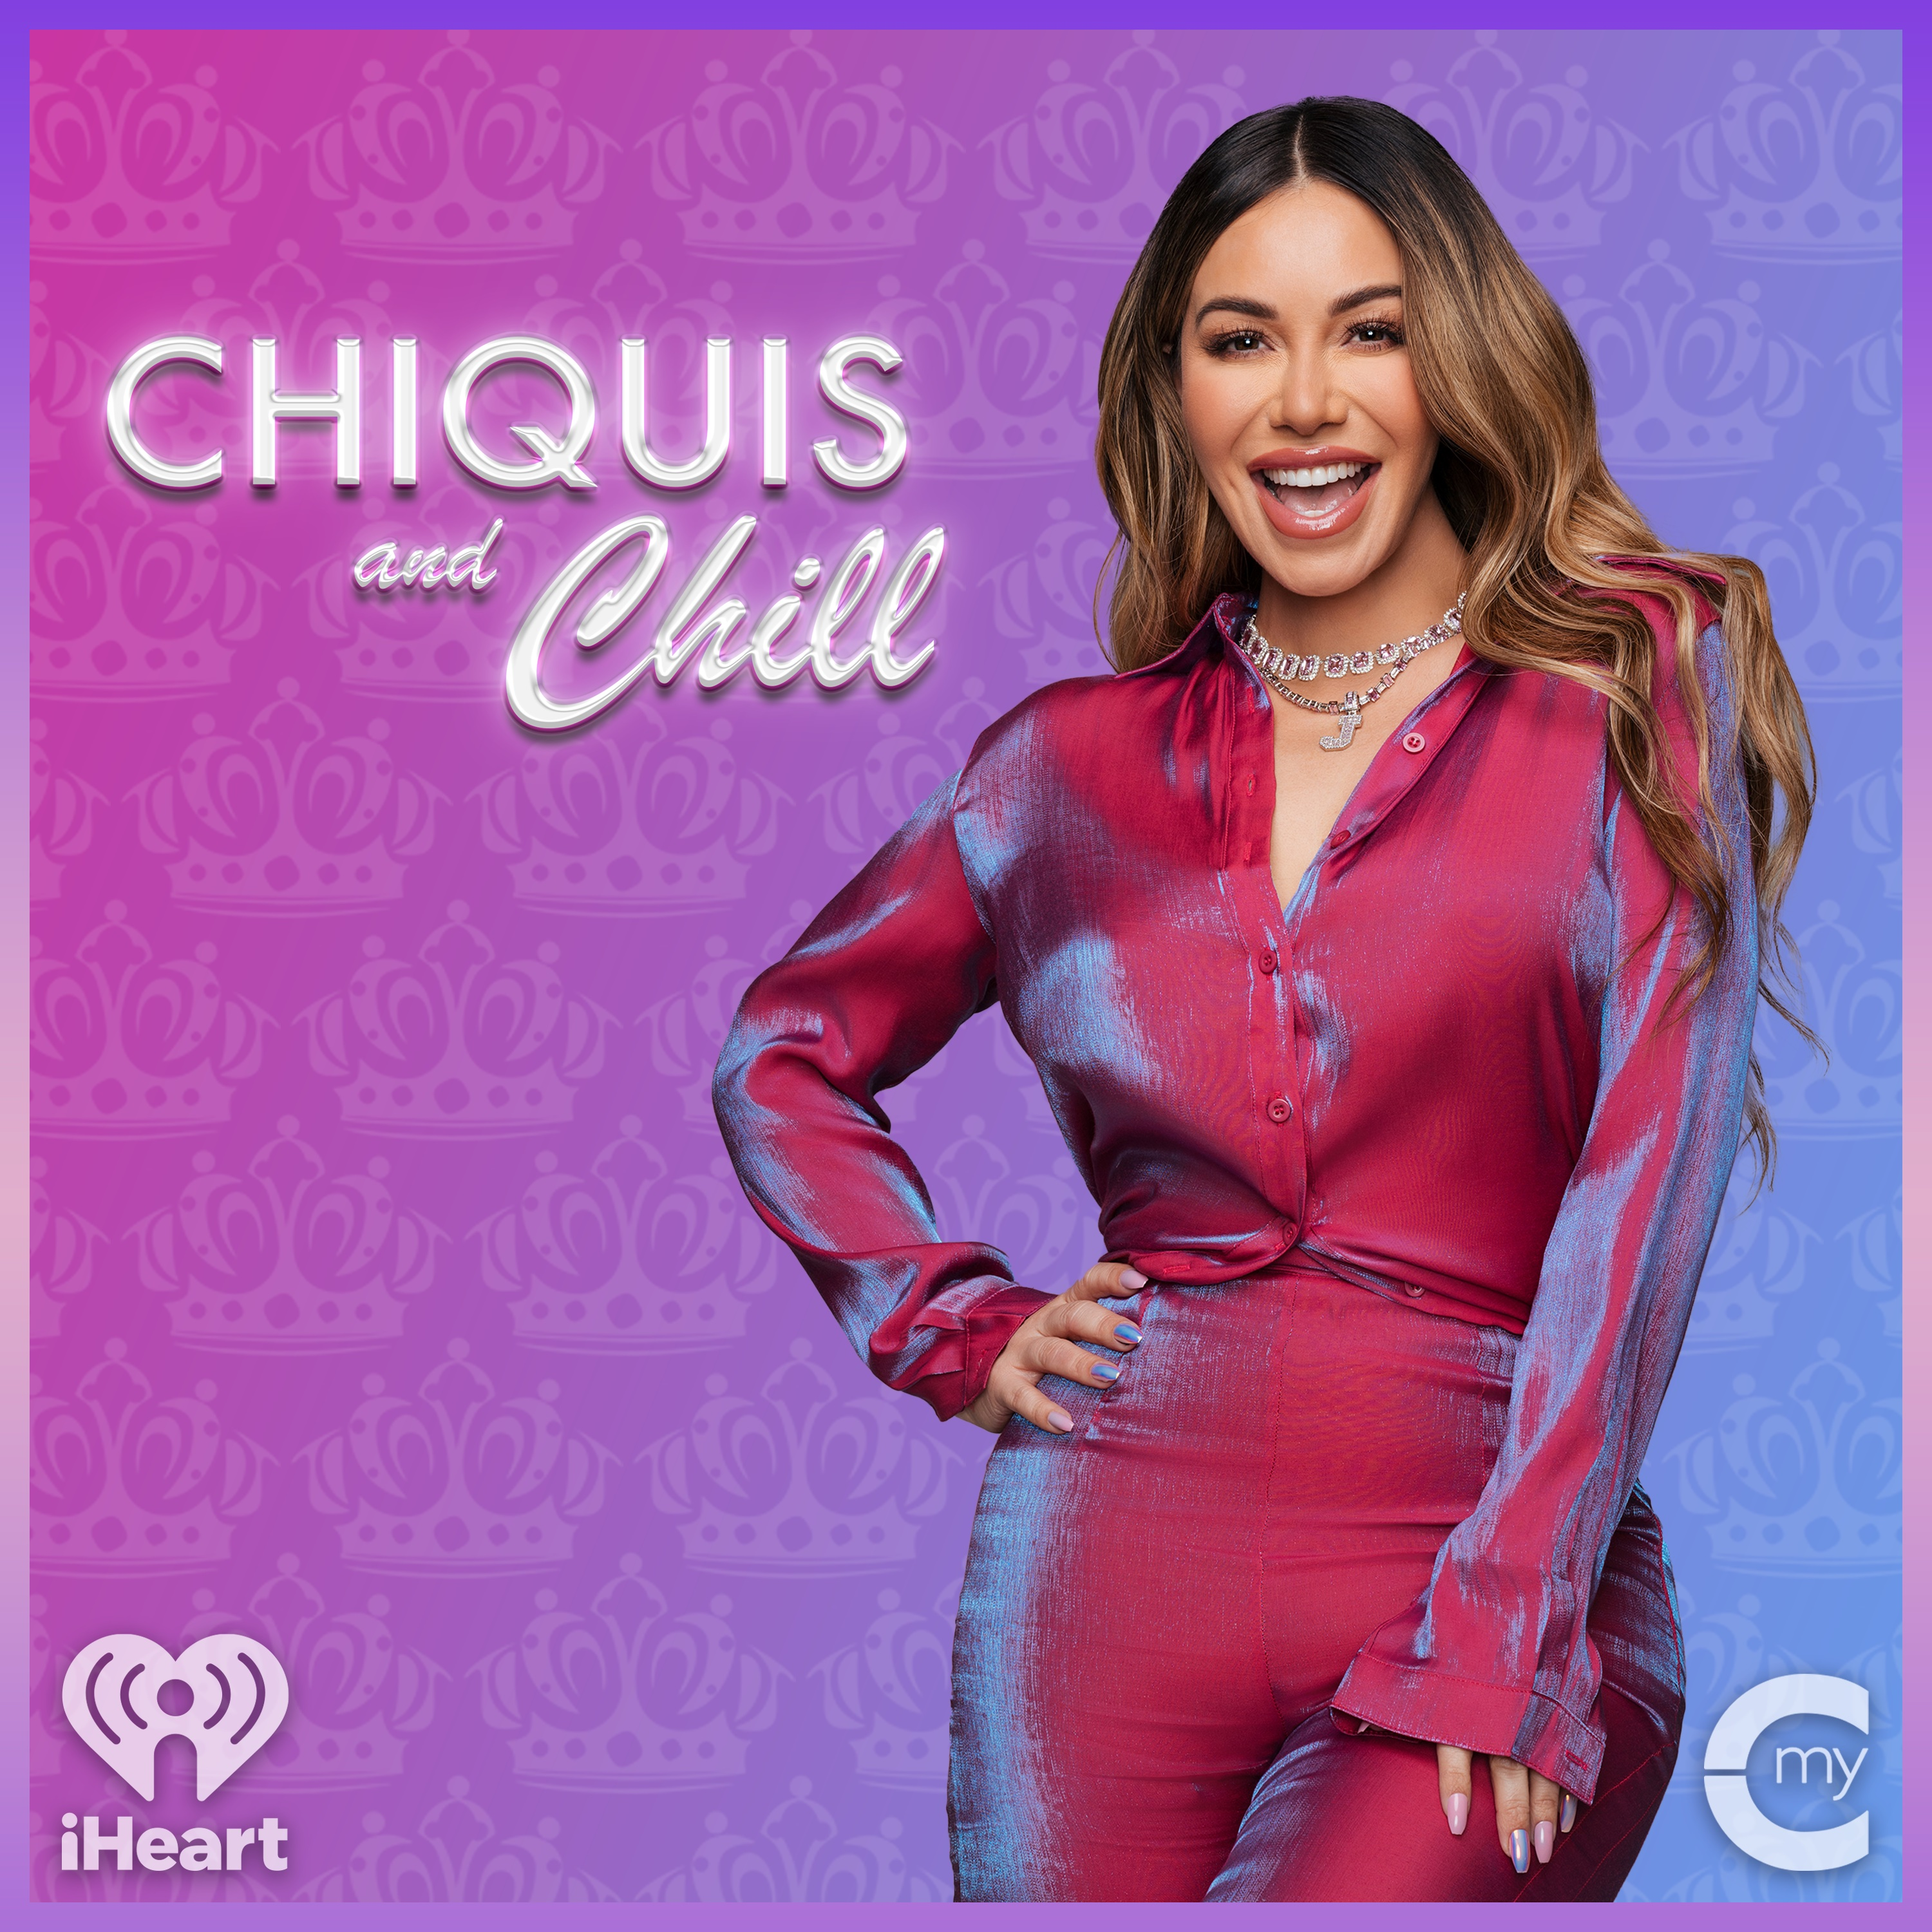 Advice for Little Chiquis, The Biggest Misconception About Me, Who Picks Up the Tab and More!